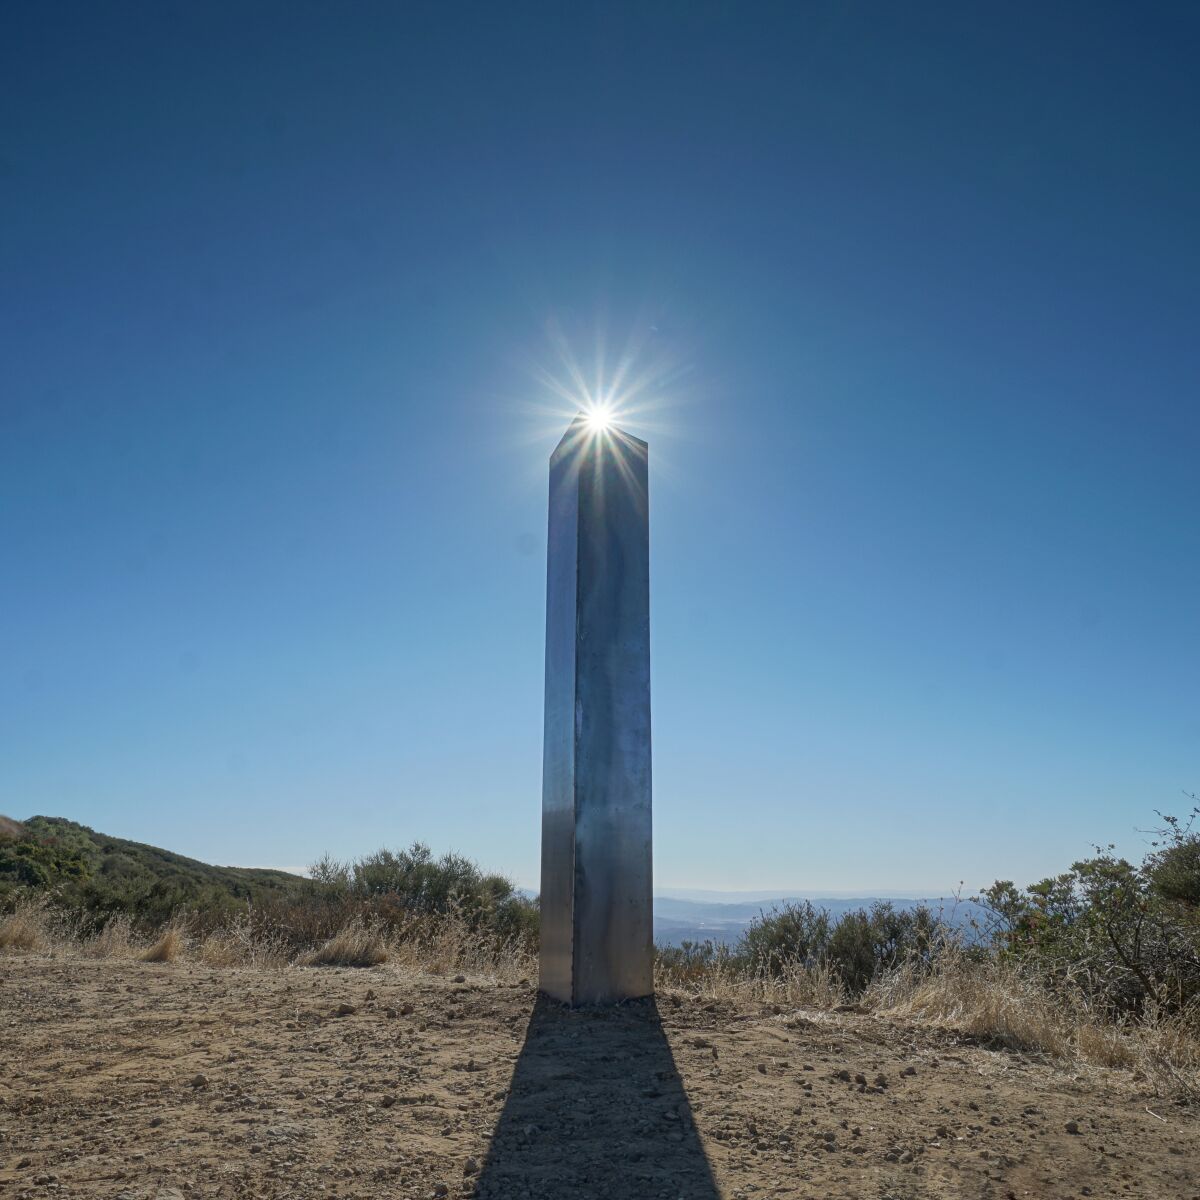 Another unusual monolith has popped up in San Luis Obispo County.